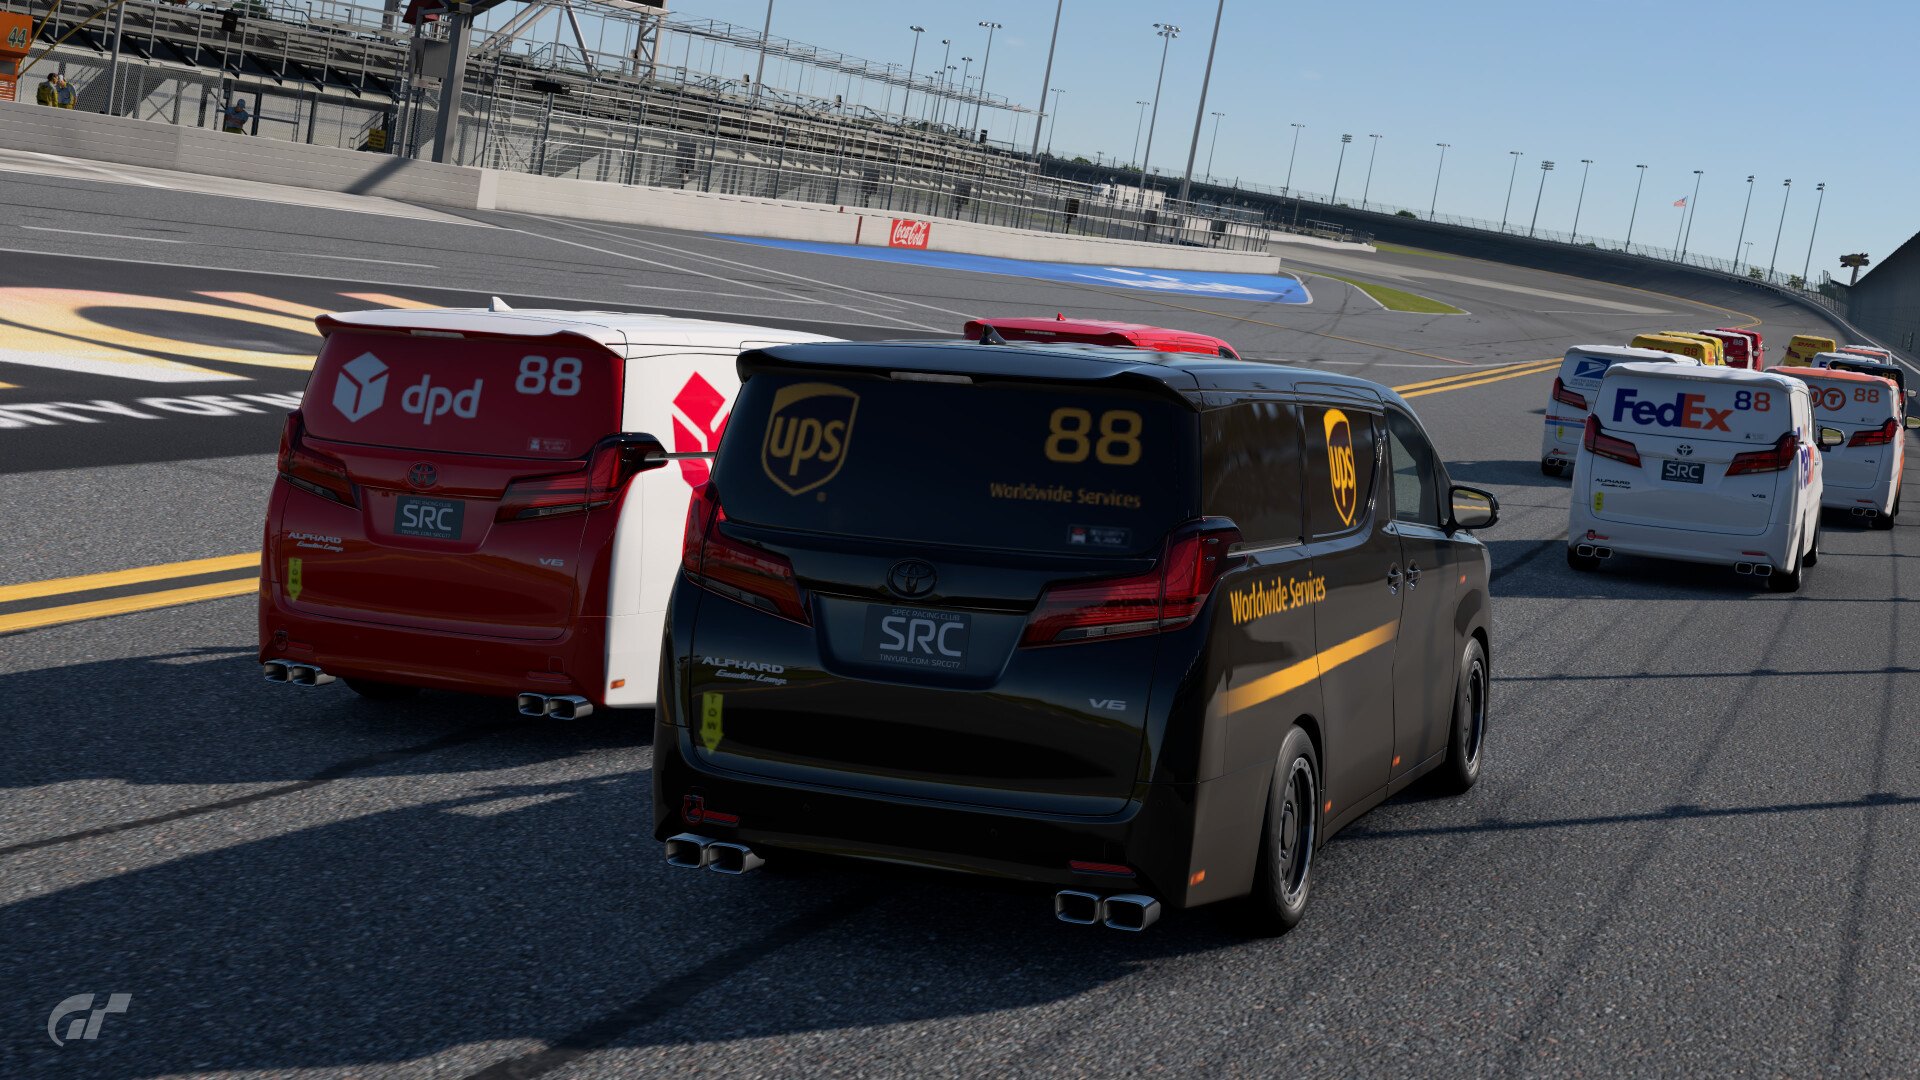 Gran Turismo 7 Update 1.37 Out This August 31 Comes With Stability Fixes